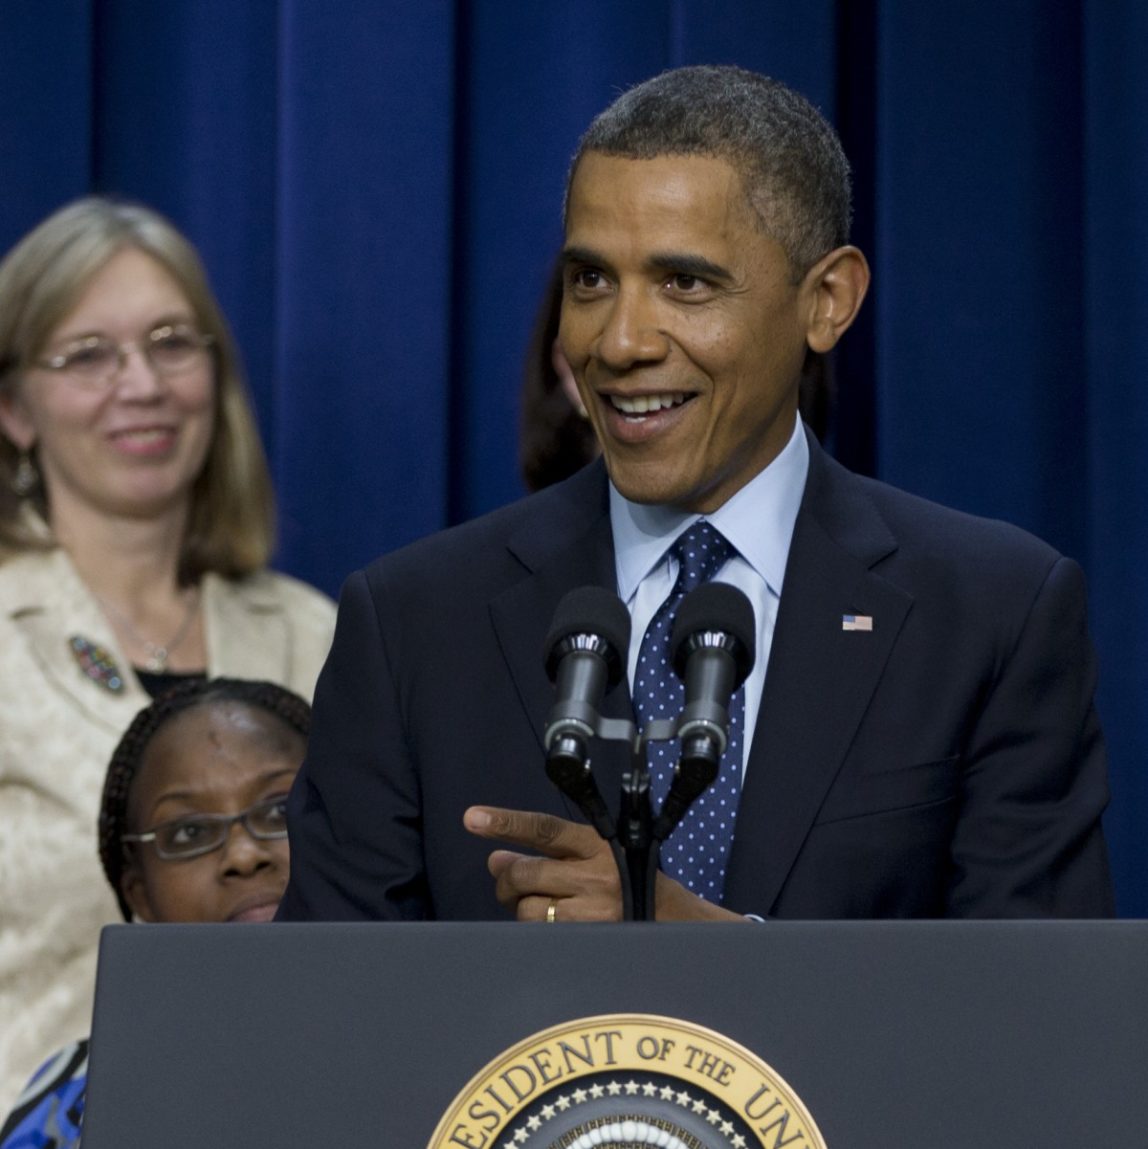 Looking Ahead: Obama’s Second Term — Change At Home, But Unlikely Beyond Borders